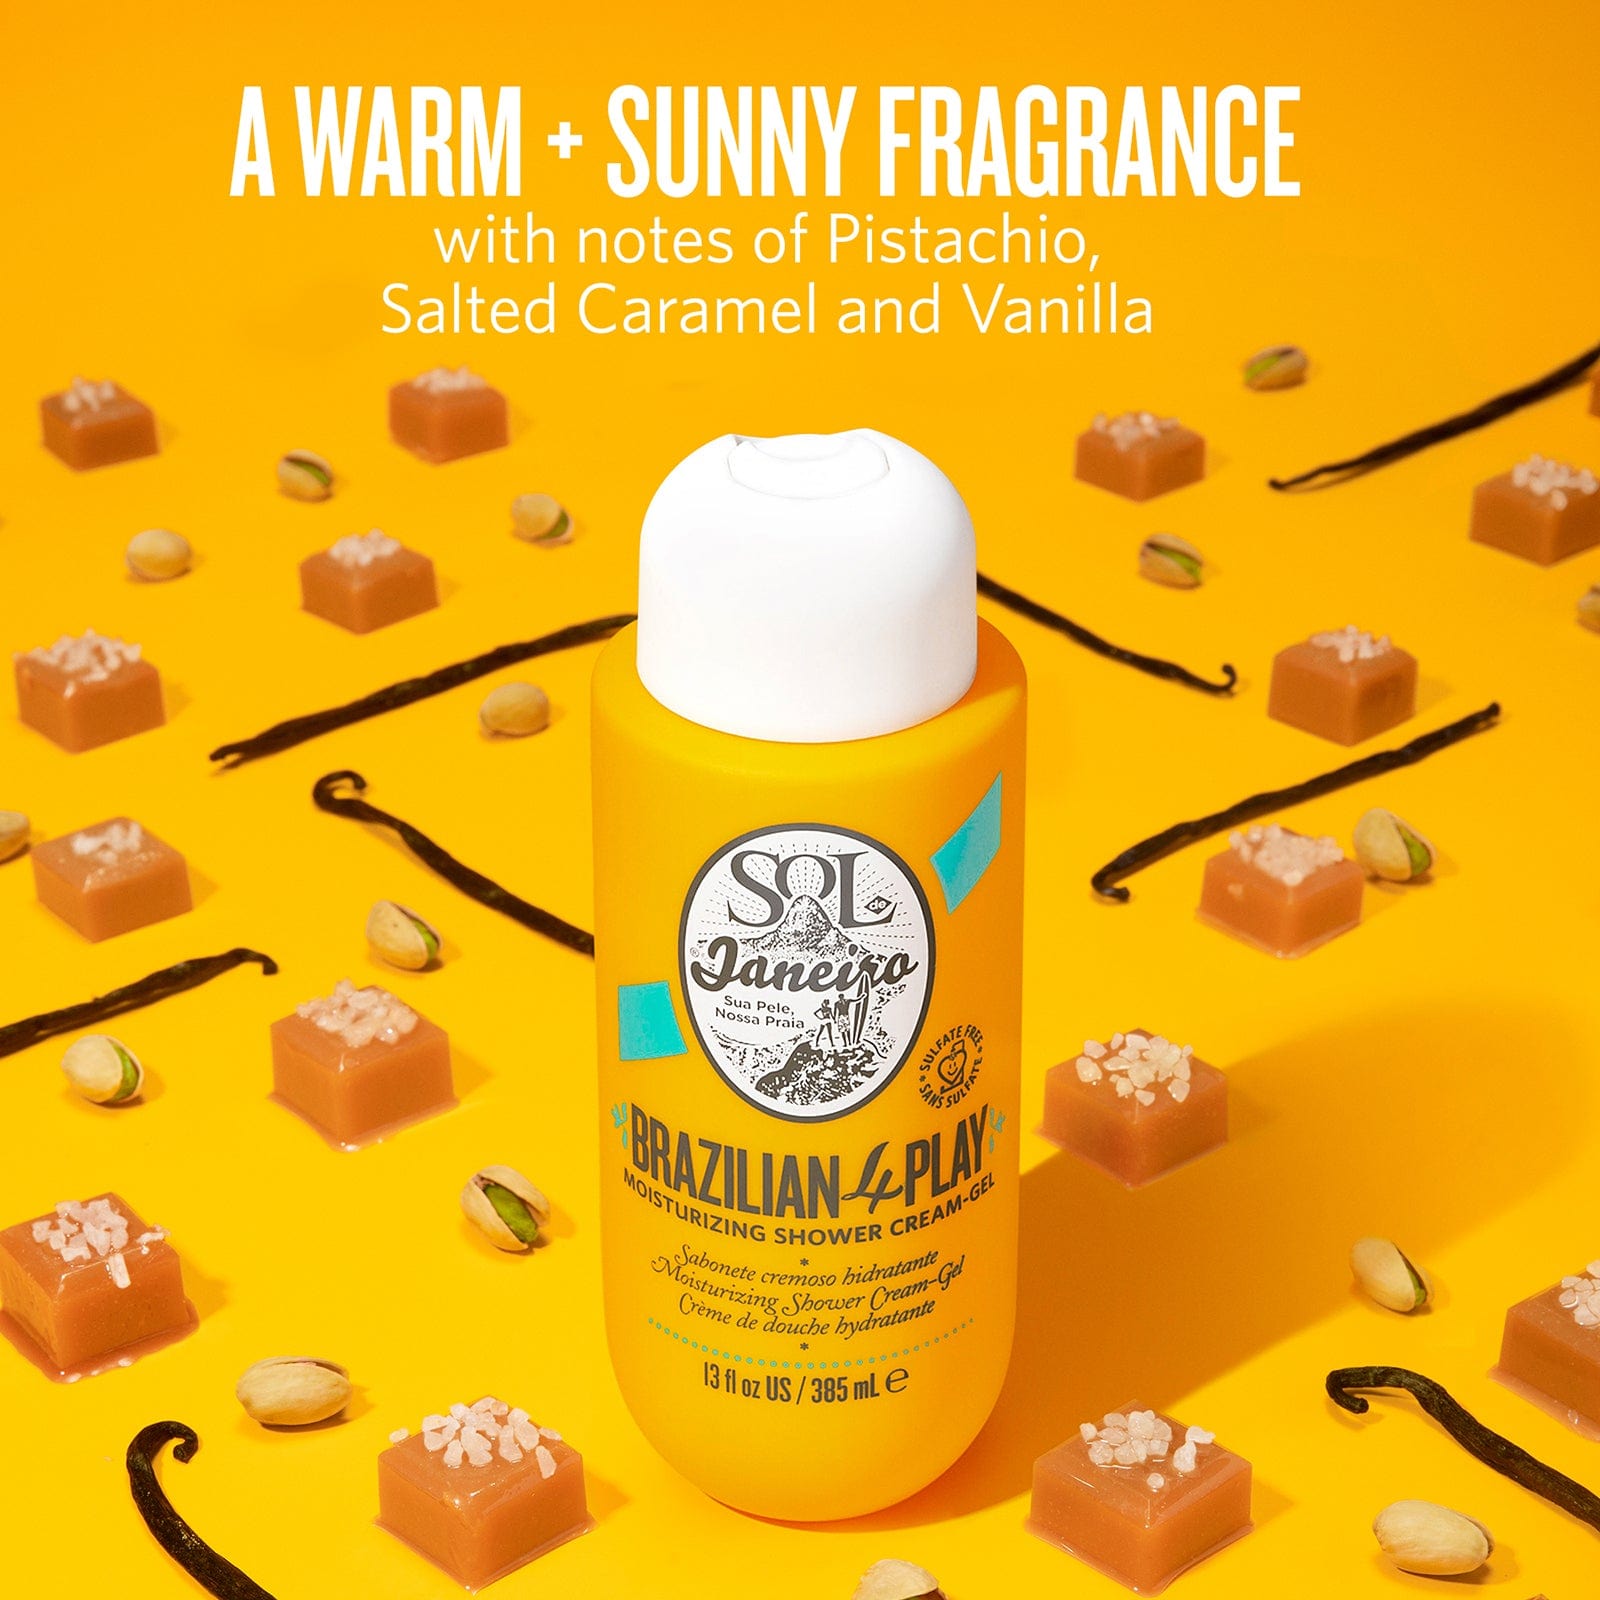 A warm + Sunny fragrance with notes of pistachio, salted caramel and vanilla